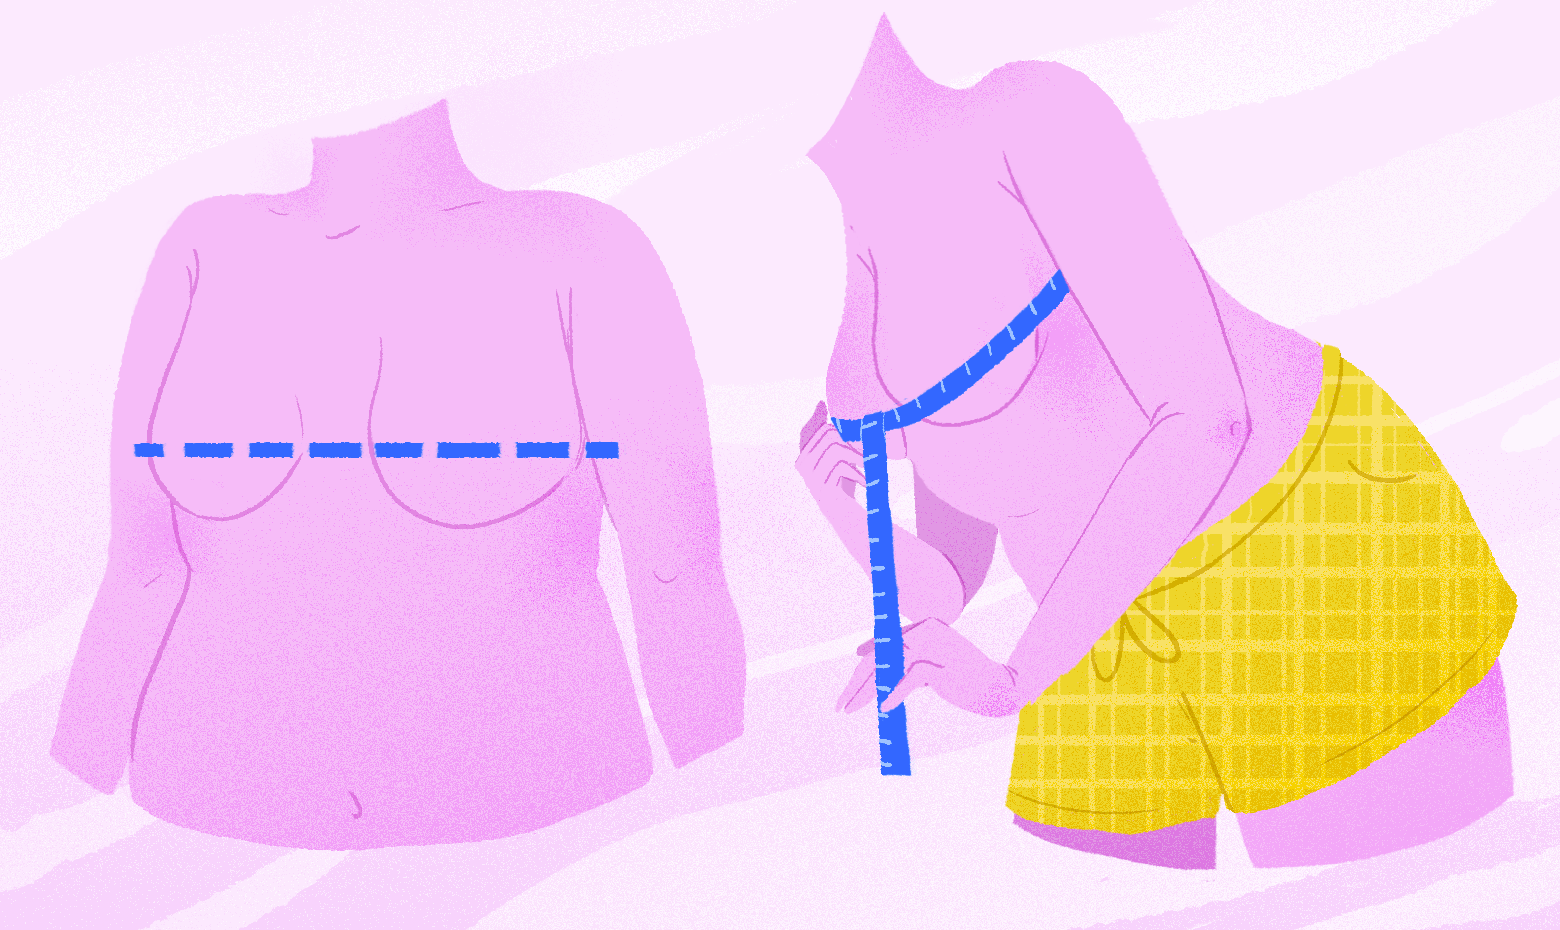 Find your proper bra cup and band size in inches with this